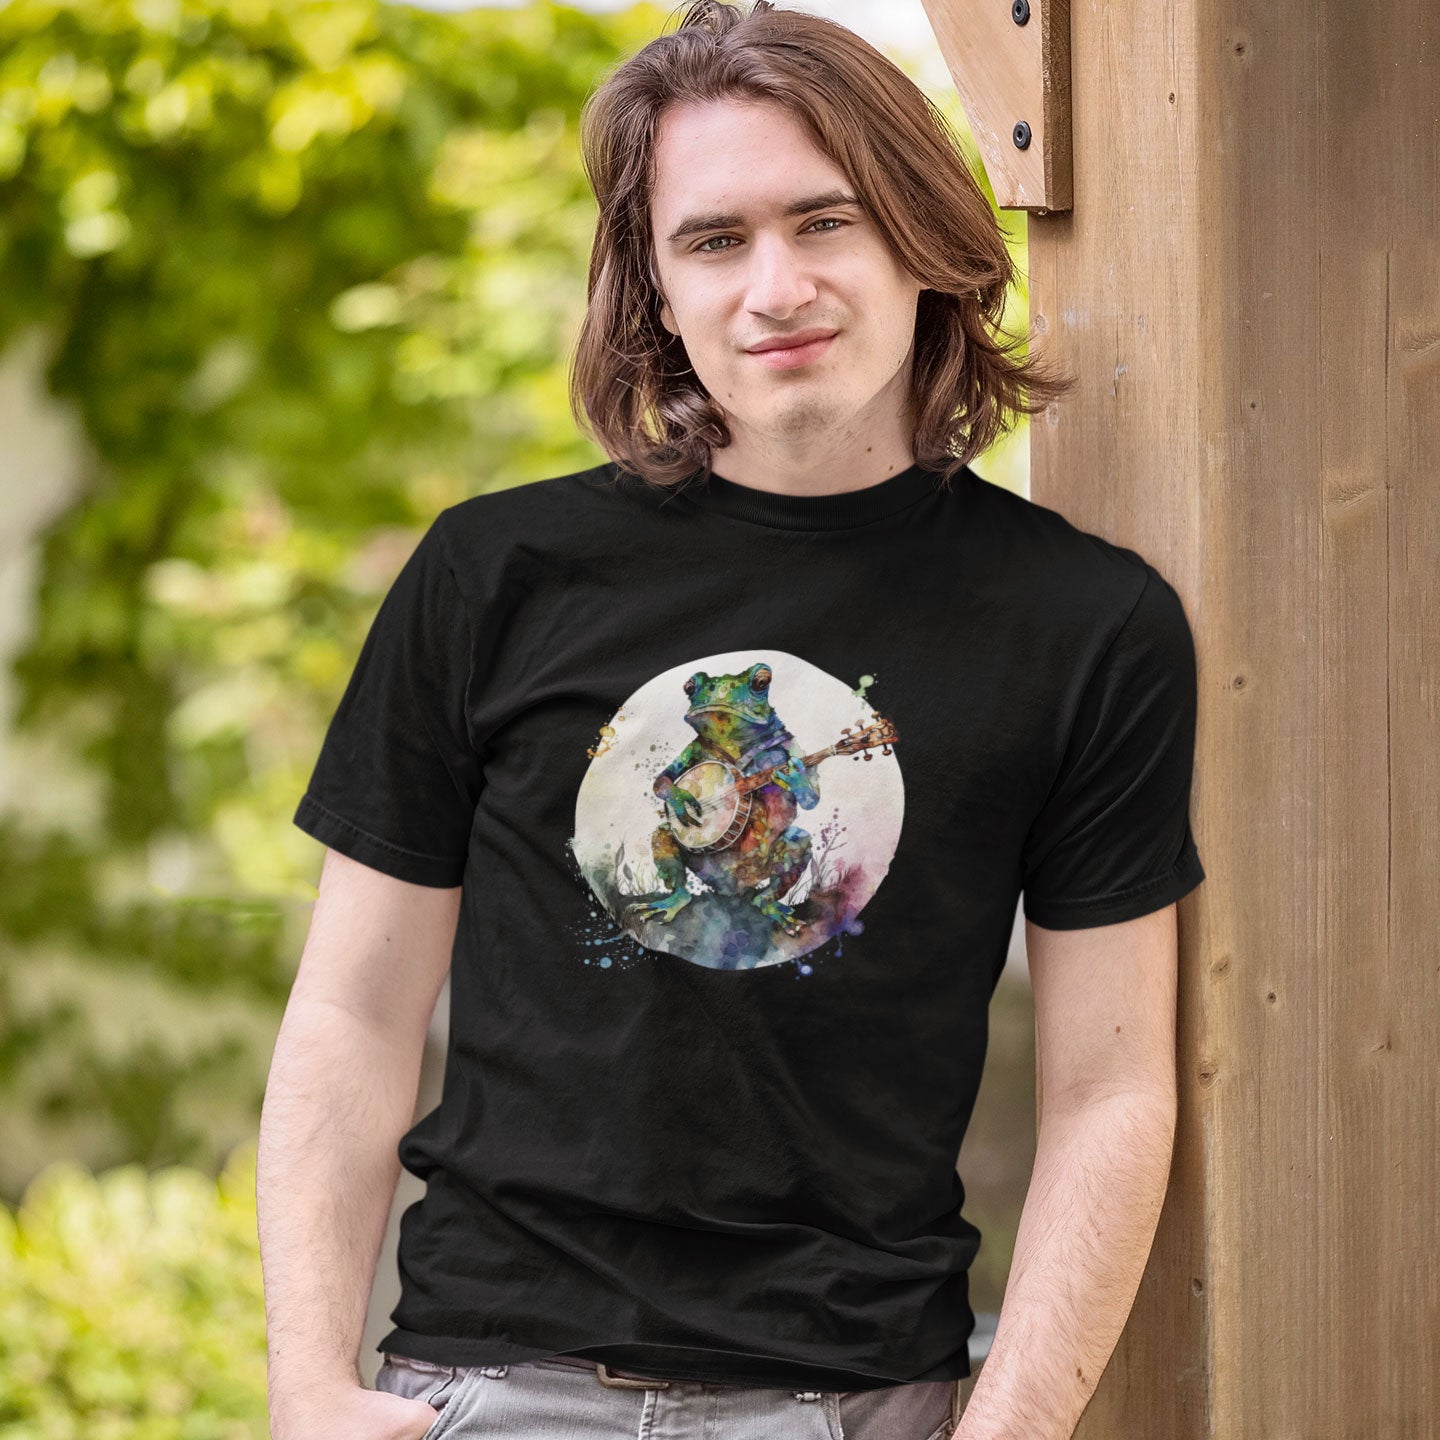 Guy wearing a black t-shirt with a frog playing a banjo print